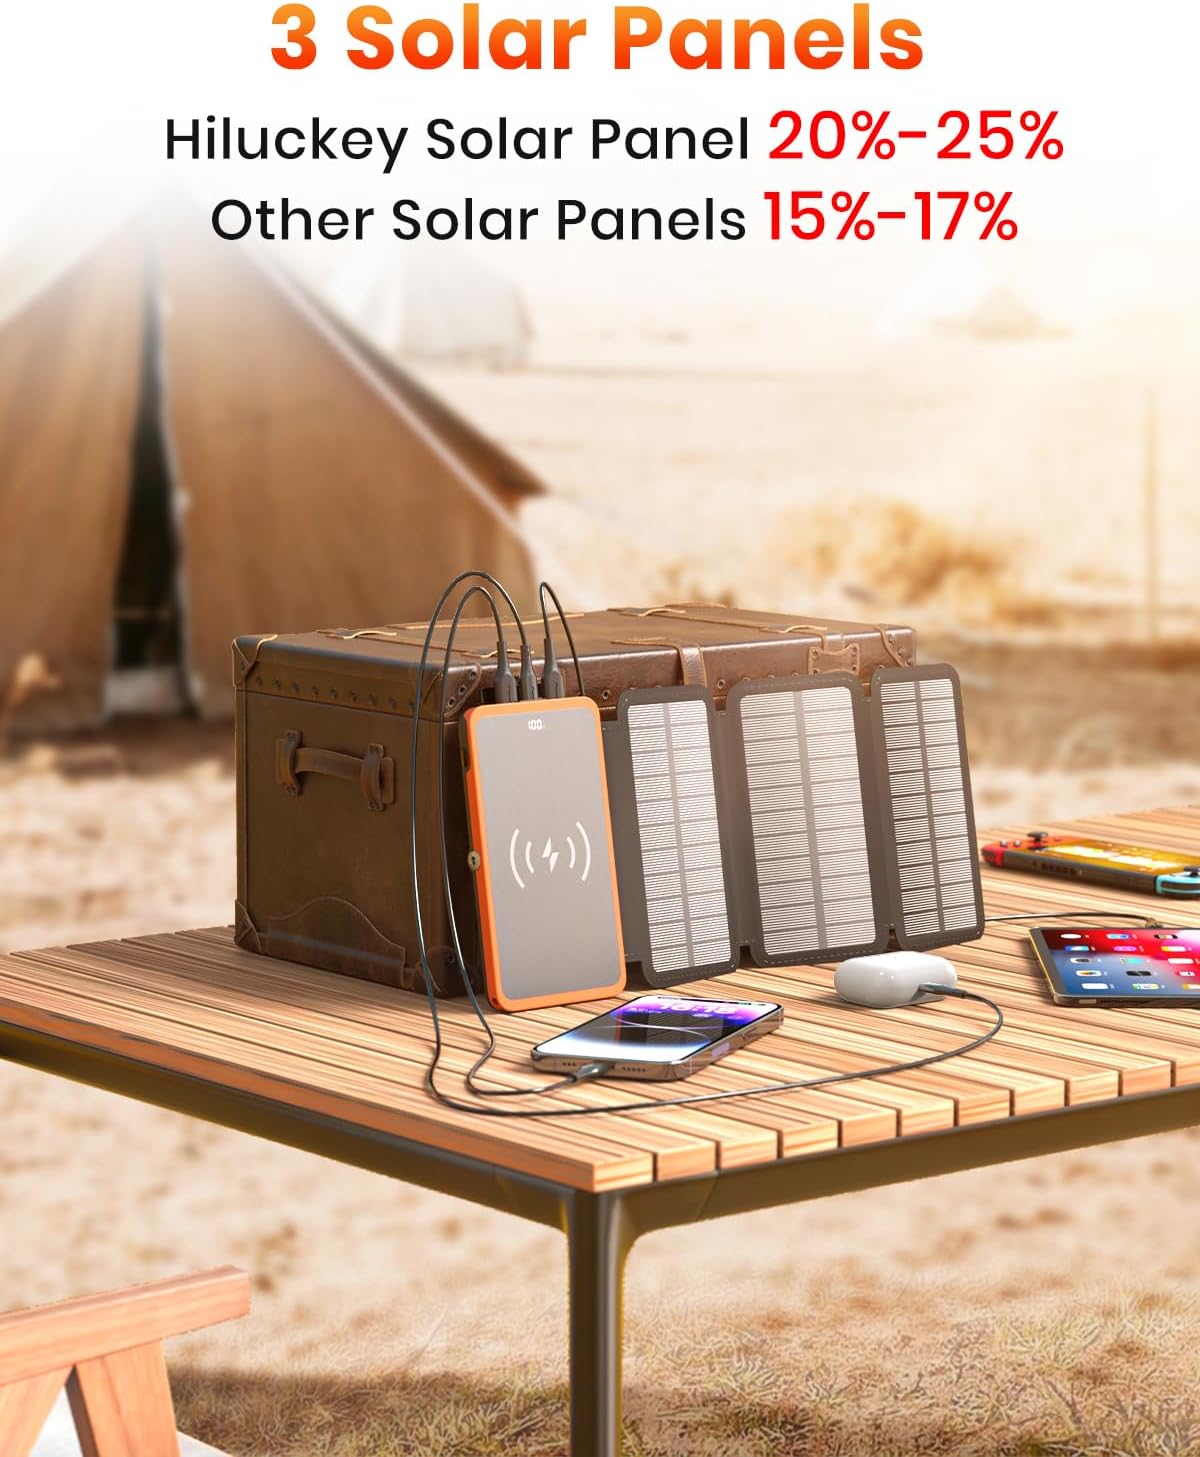 Hiluckey Wireless Solar Charger 10000mAh with 4 Solar Panels